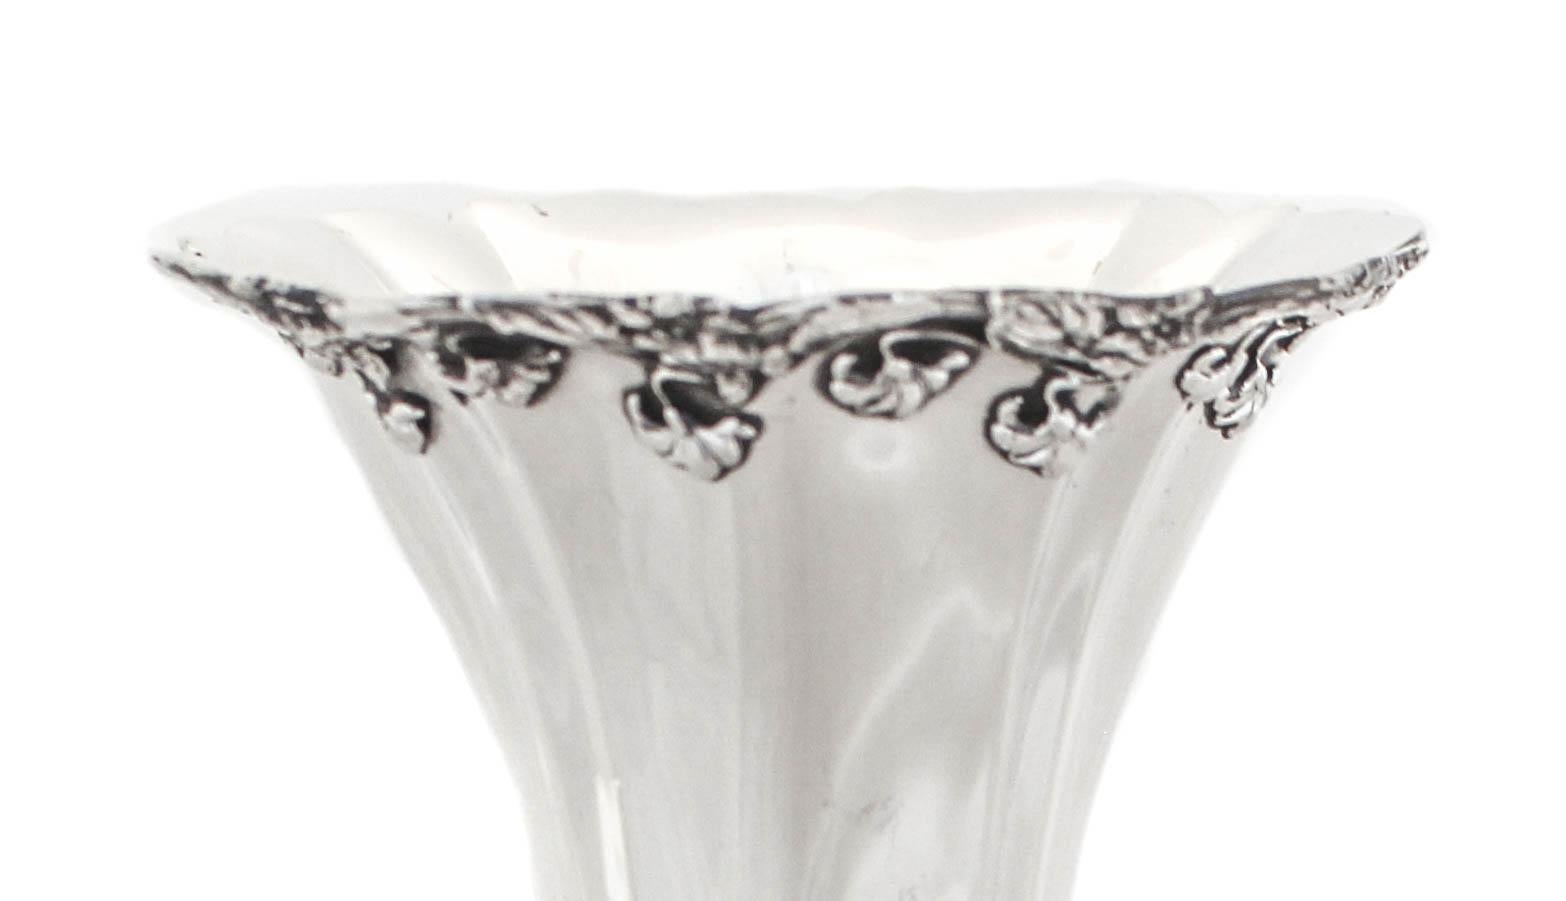 Being offered is a sterling silver vase by the Whiting Manufacturing Company, hallmarked 1906.  Designed and manufactured at the height of the Art Nouveau movement it has a floral motif around both the rim and base.  The flowers seem to flow and